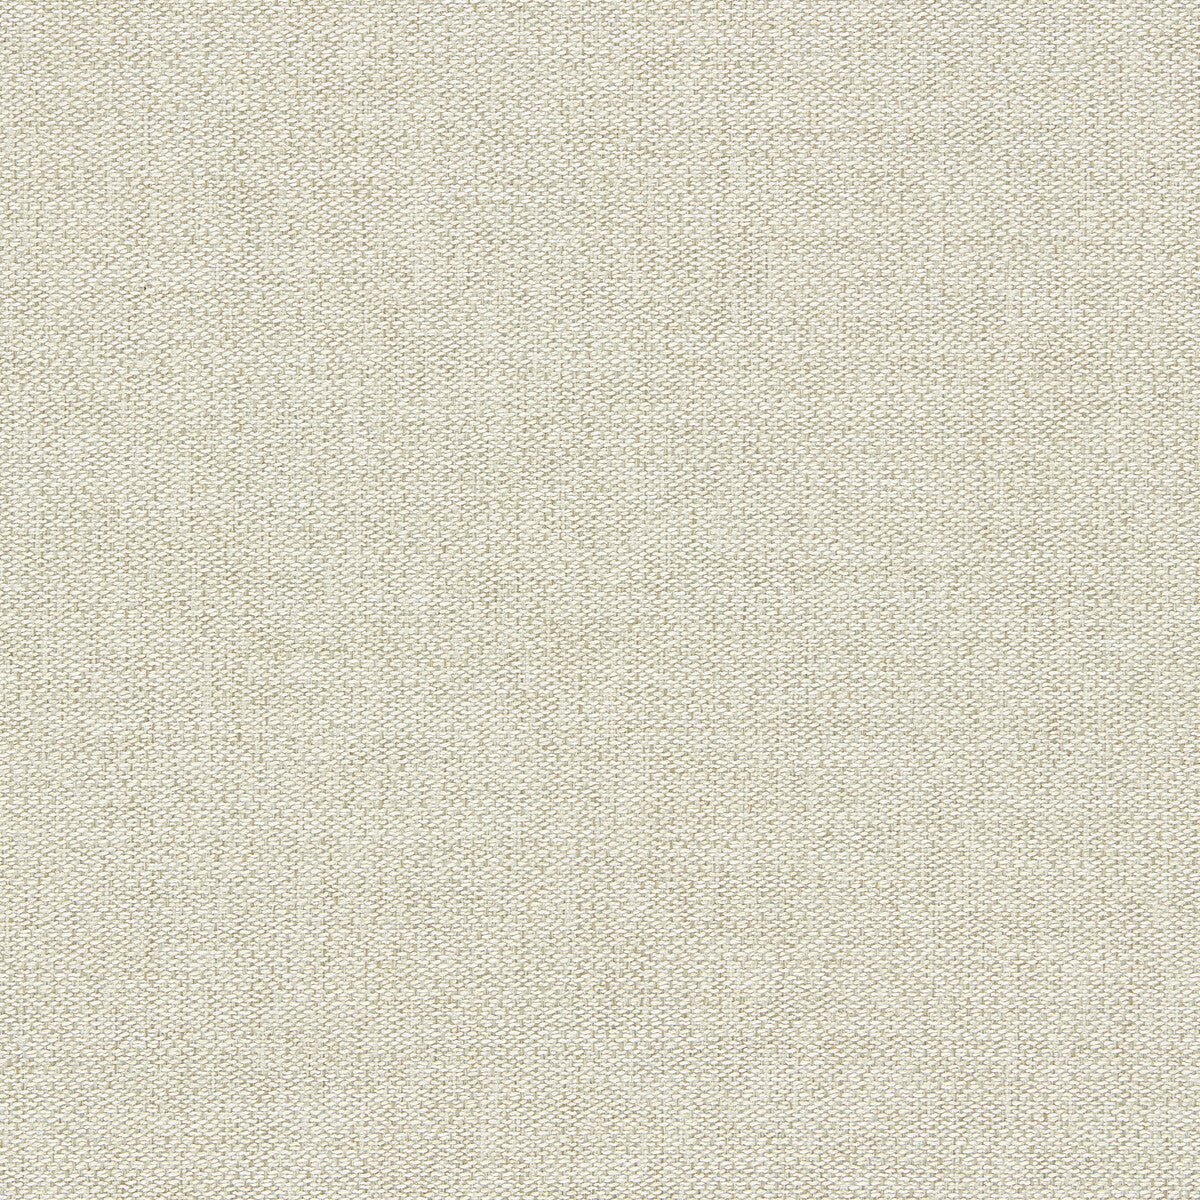 Llanara fabric in linen color - pattern F1422/05.CAC.0 - by Clarke And Clarke in the Clarke &amp; Clarke Purus collection